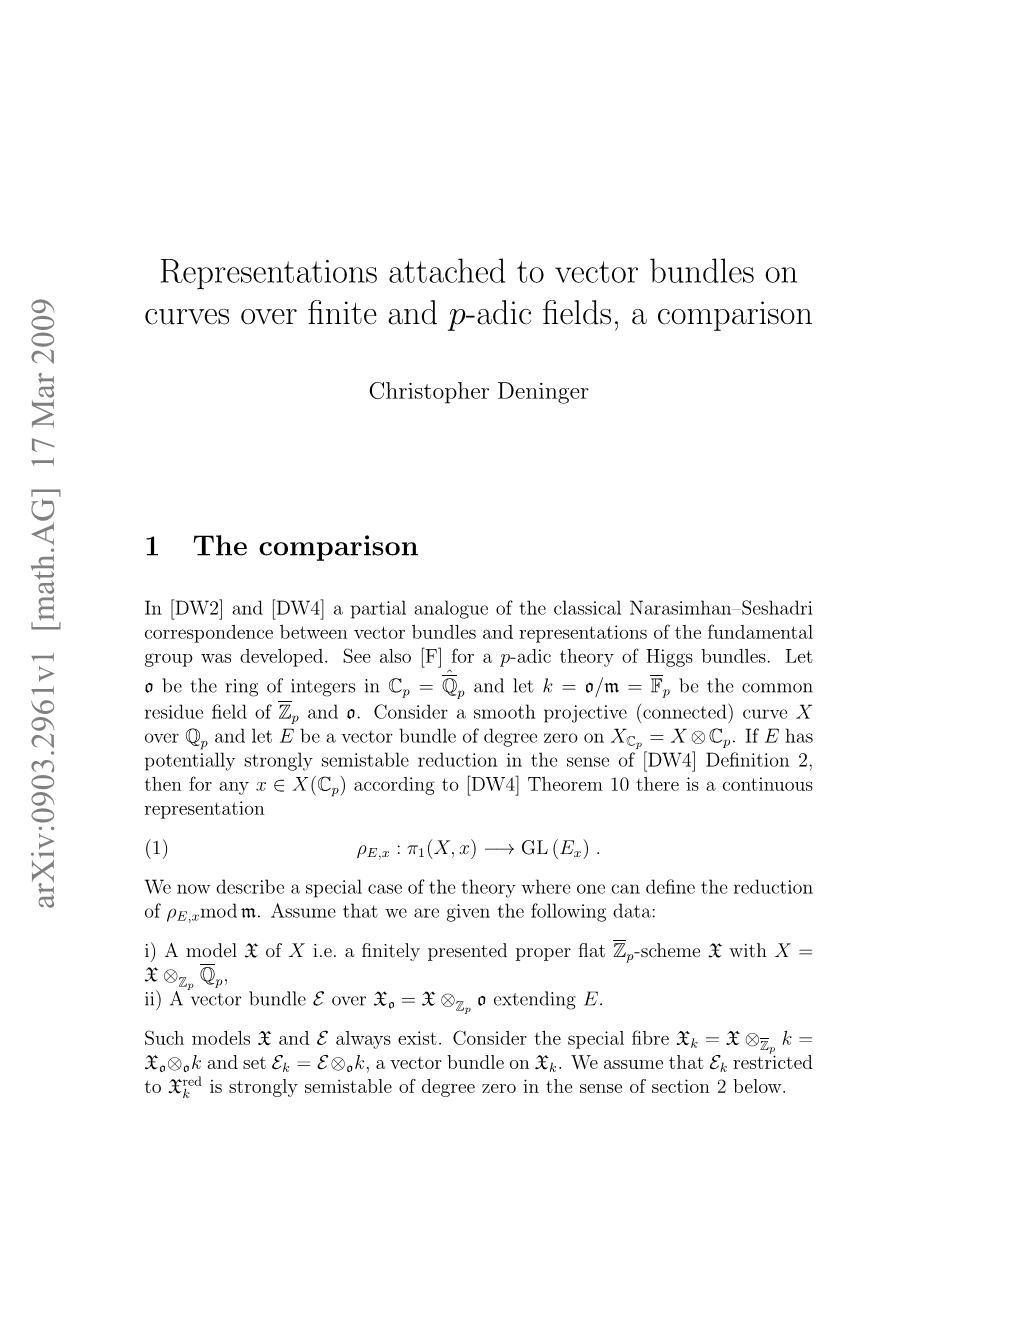 Representations Attached to Vector Bundles on Curves Over Finite